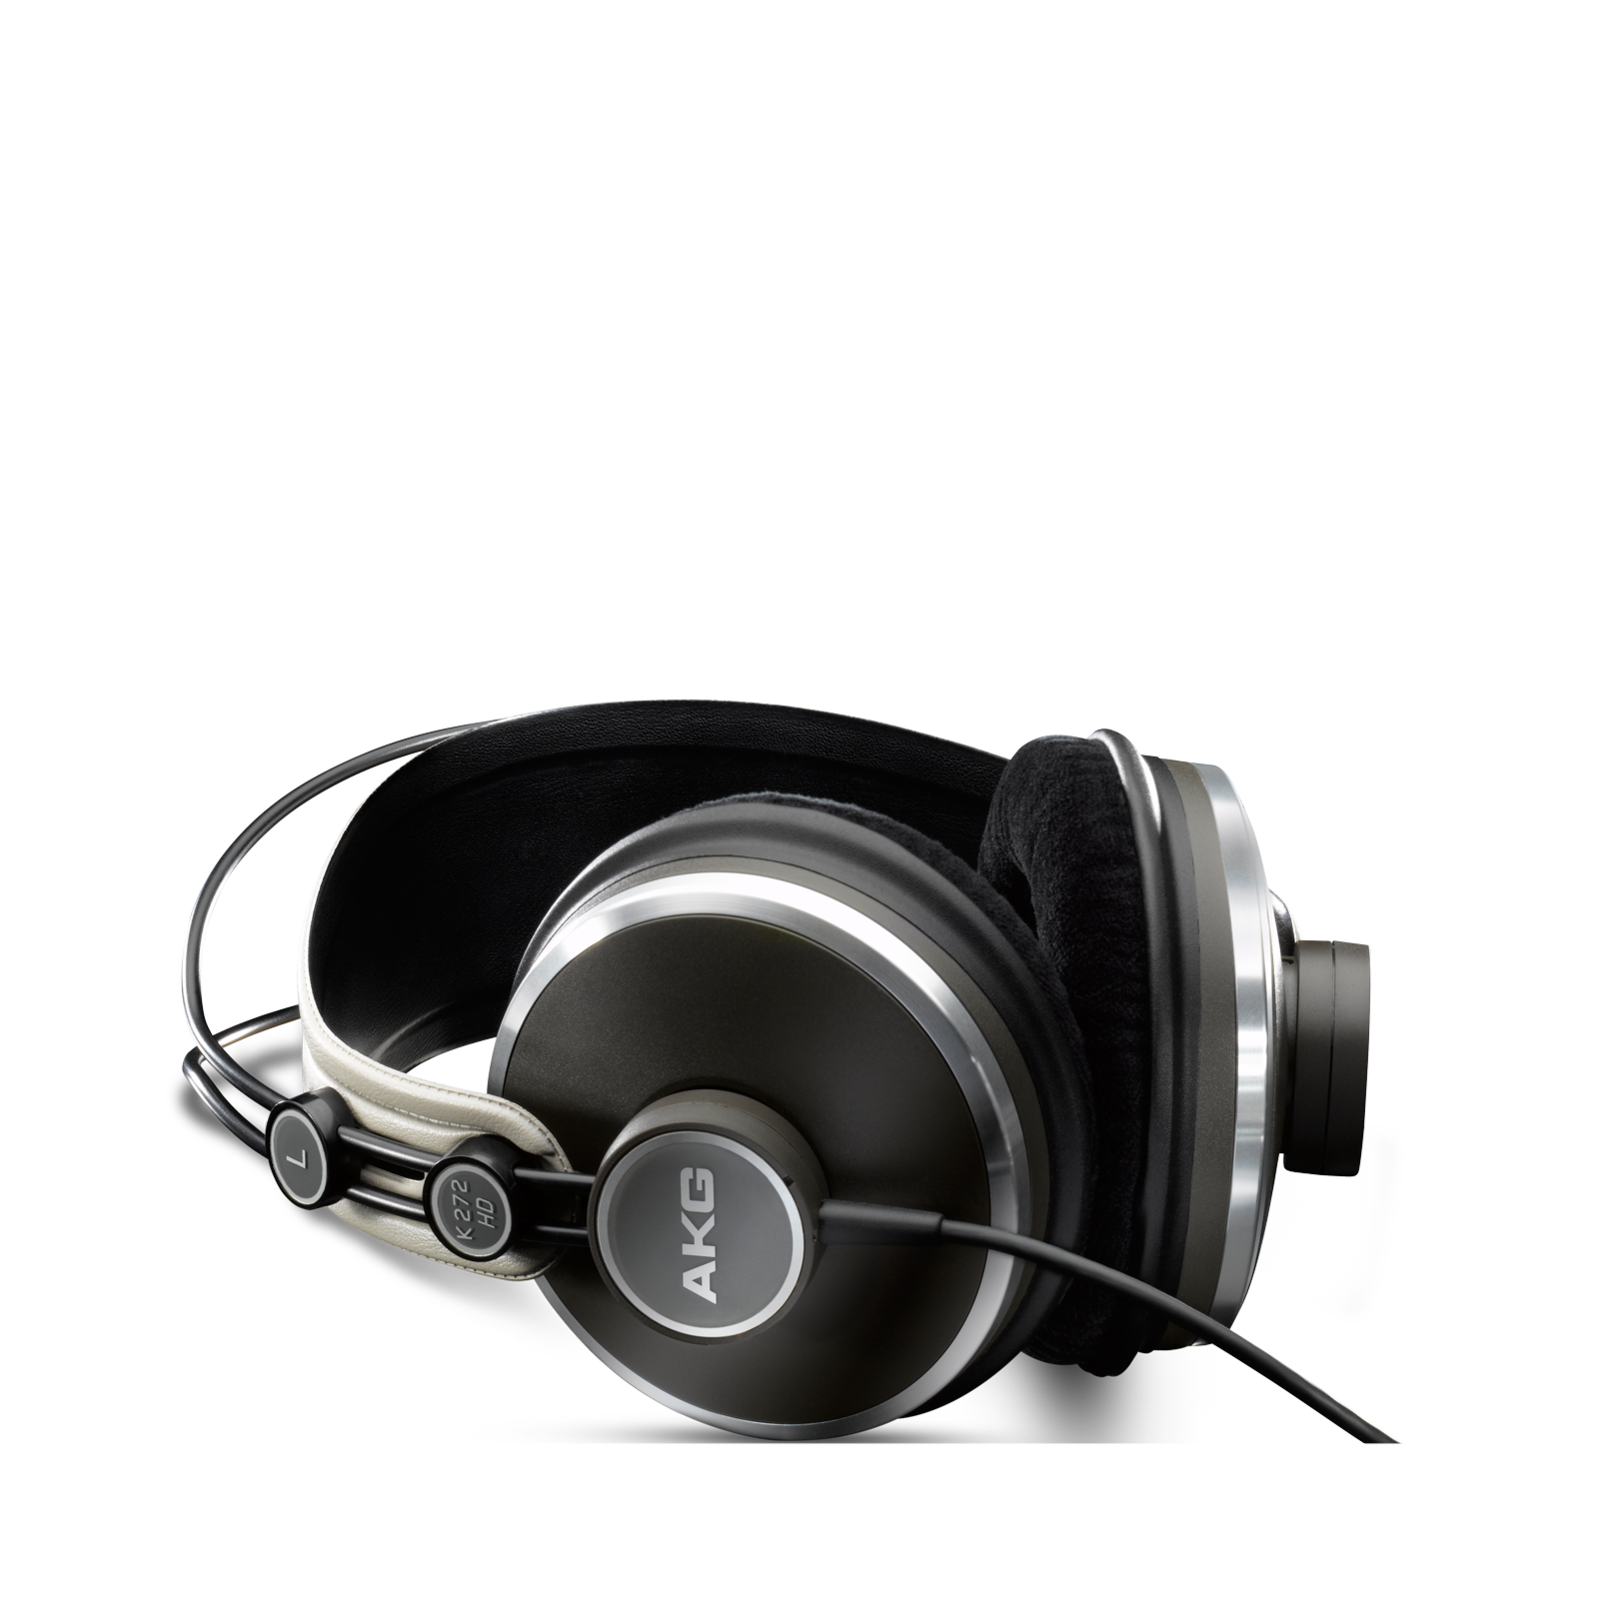 K272HD - Black - Professional over-ear, closed back studio headphones with minimum sound leakage and maximum reduction of ambient noise - Hero